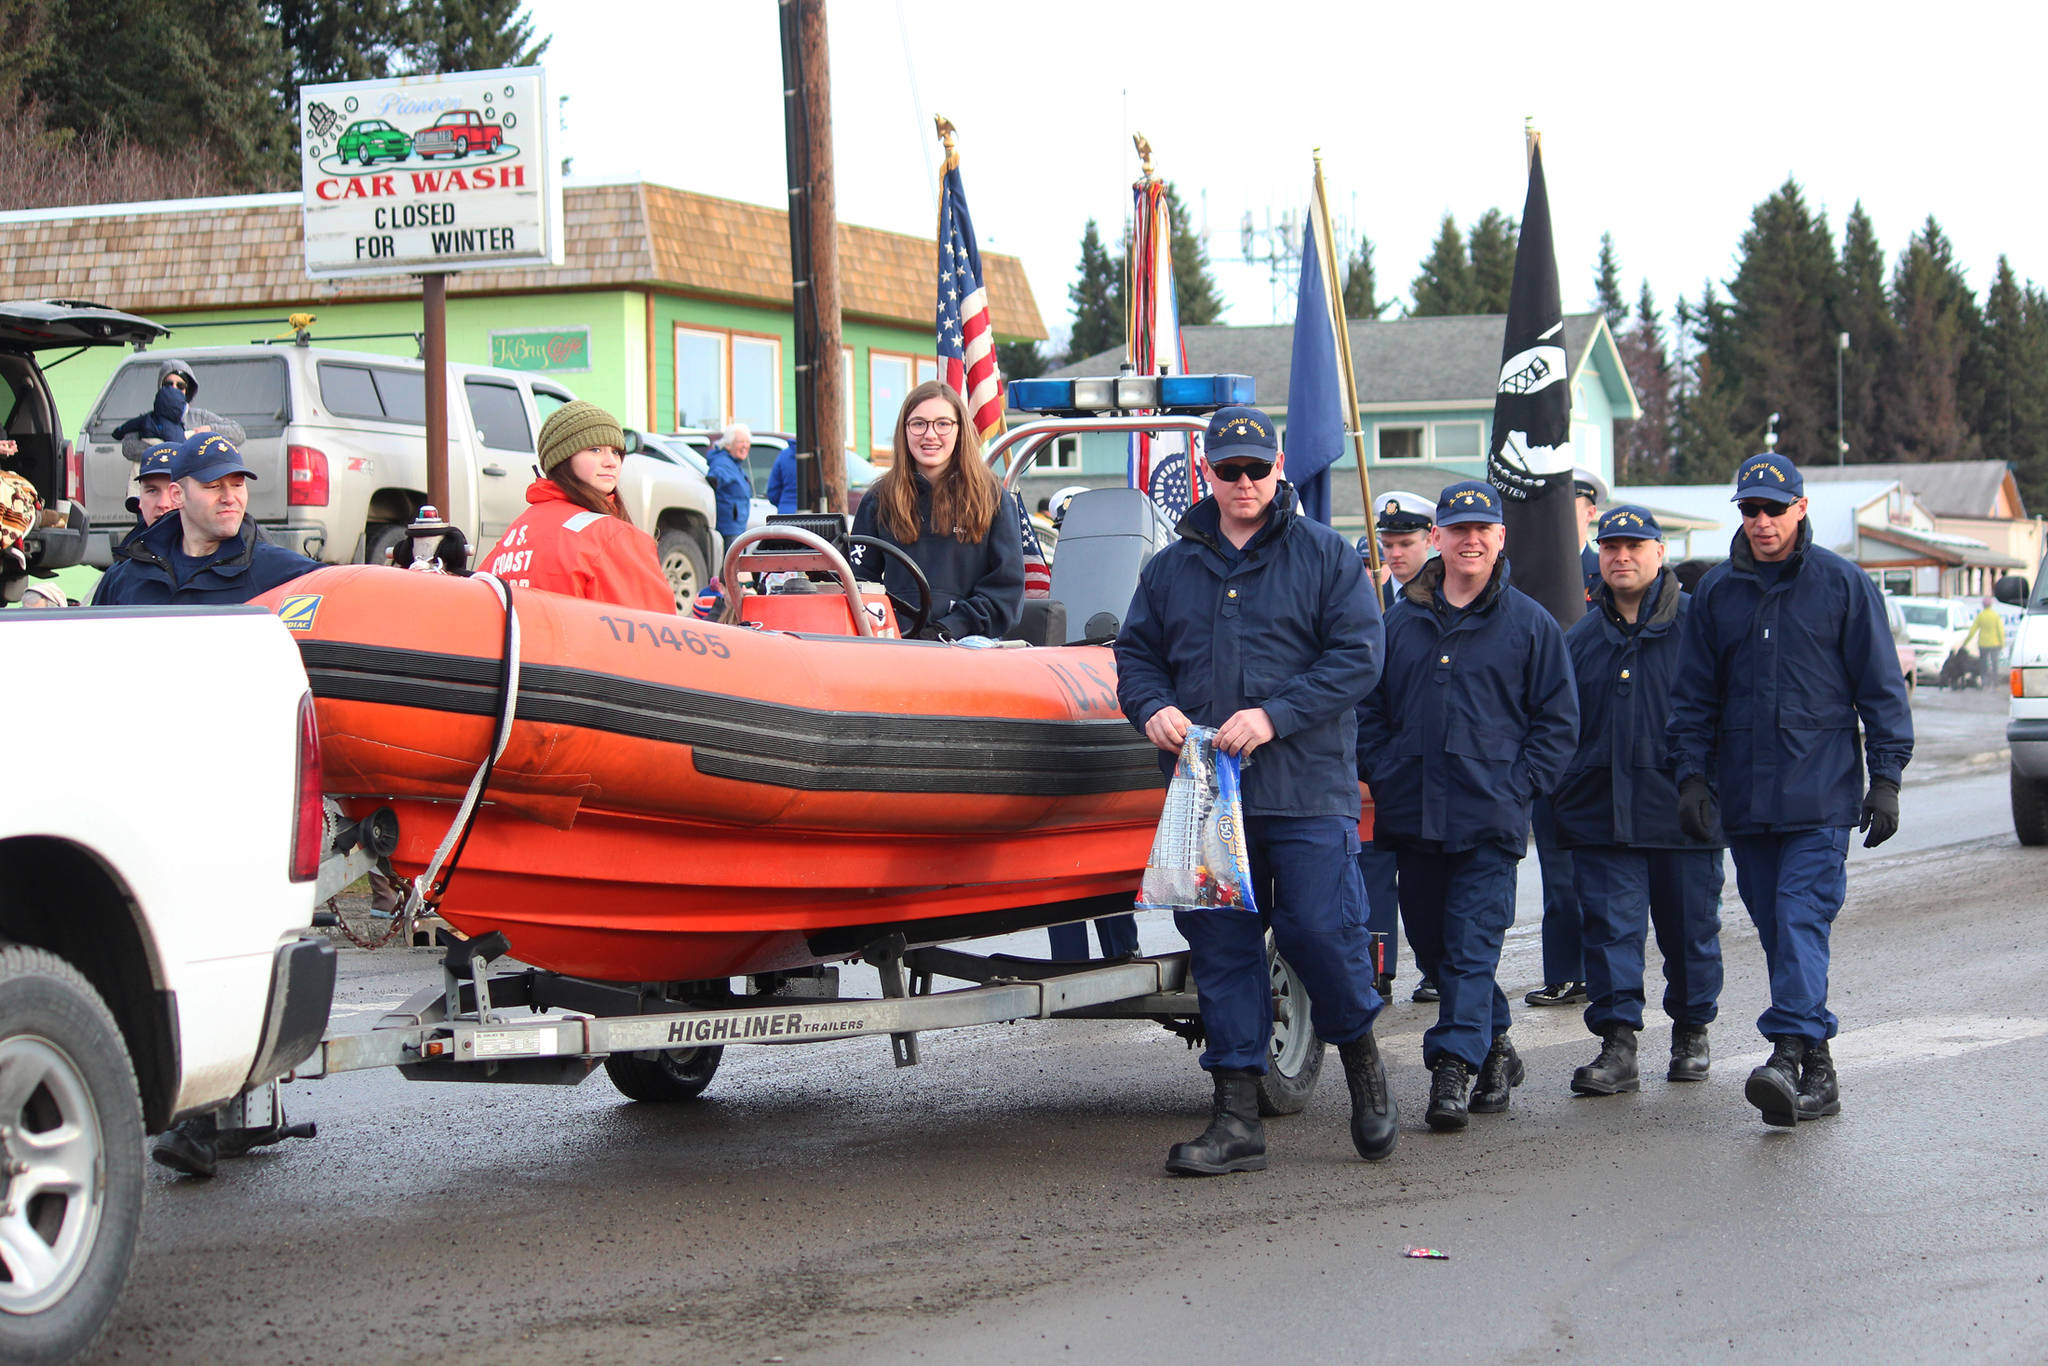 Members of the U.S. Coast Guard march down Pioneer Avenue as the Grand Marshals of this year’s Winter Carnival Parade on Saturday, Feb. 9, 2019 in Homer, Alaska. (Photo by Megan Pacer/Homer News)